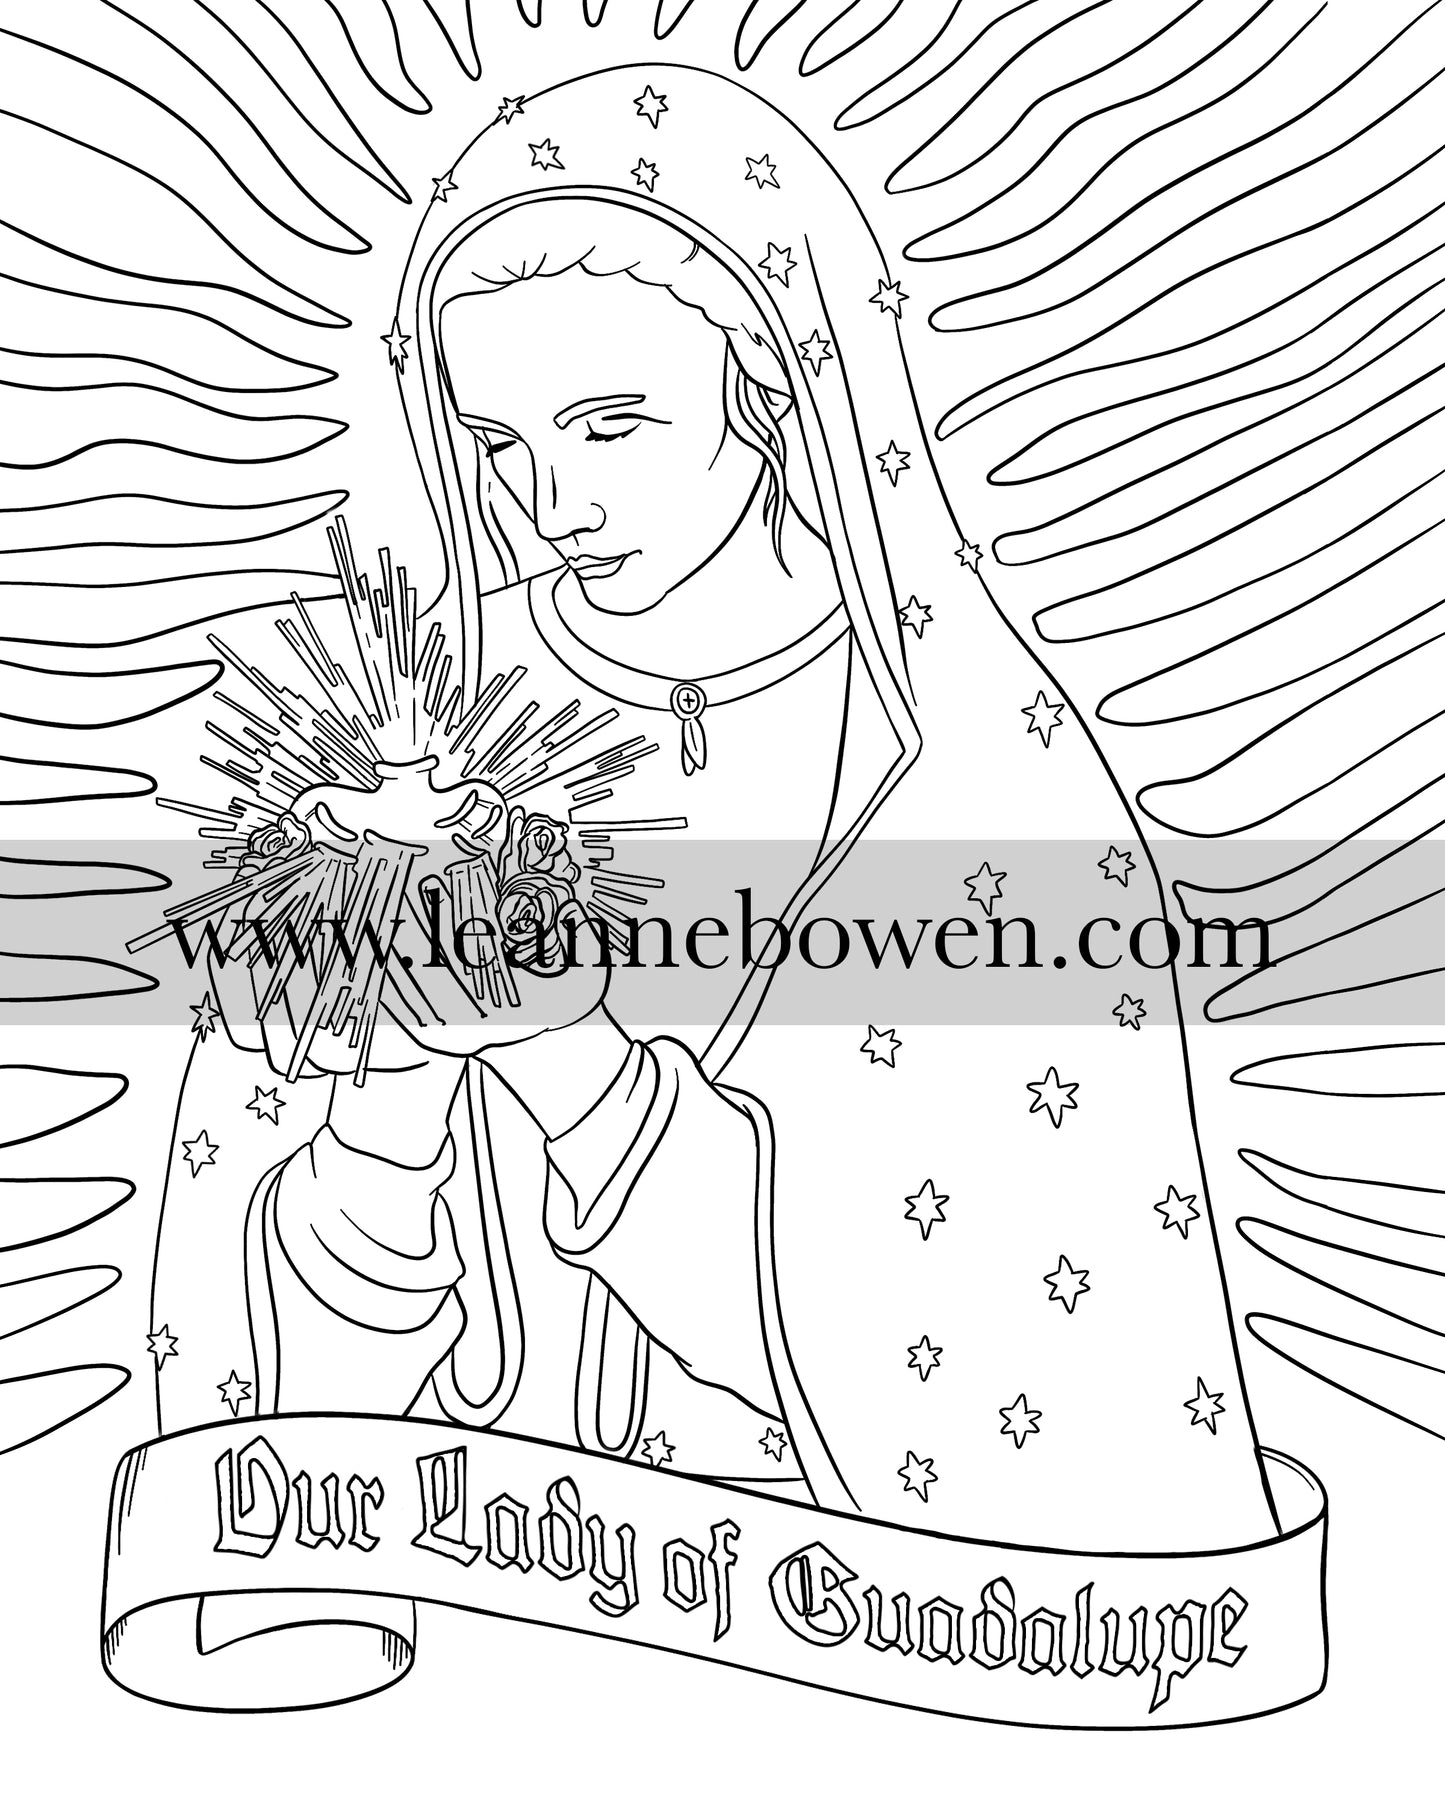 Our lady of guadalupe coloring page digital download â leanne bowen